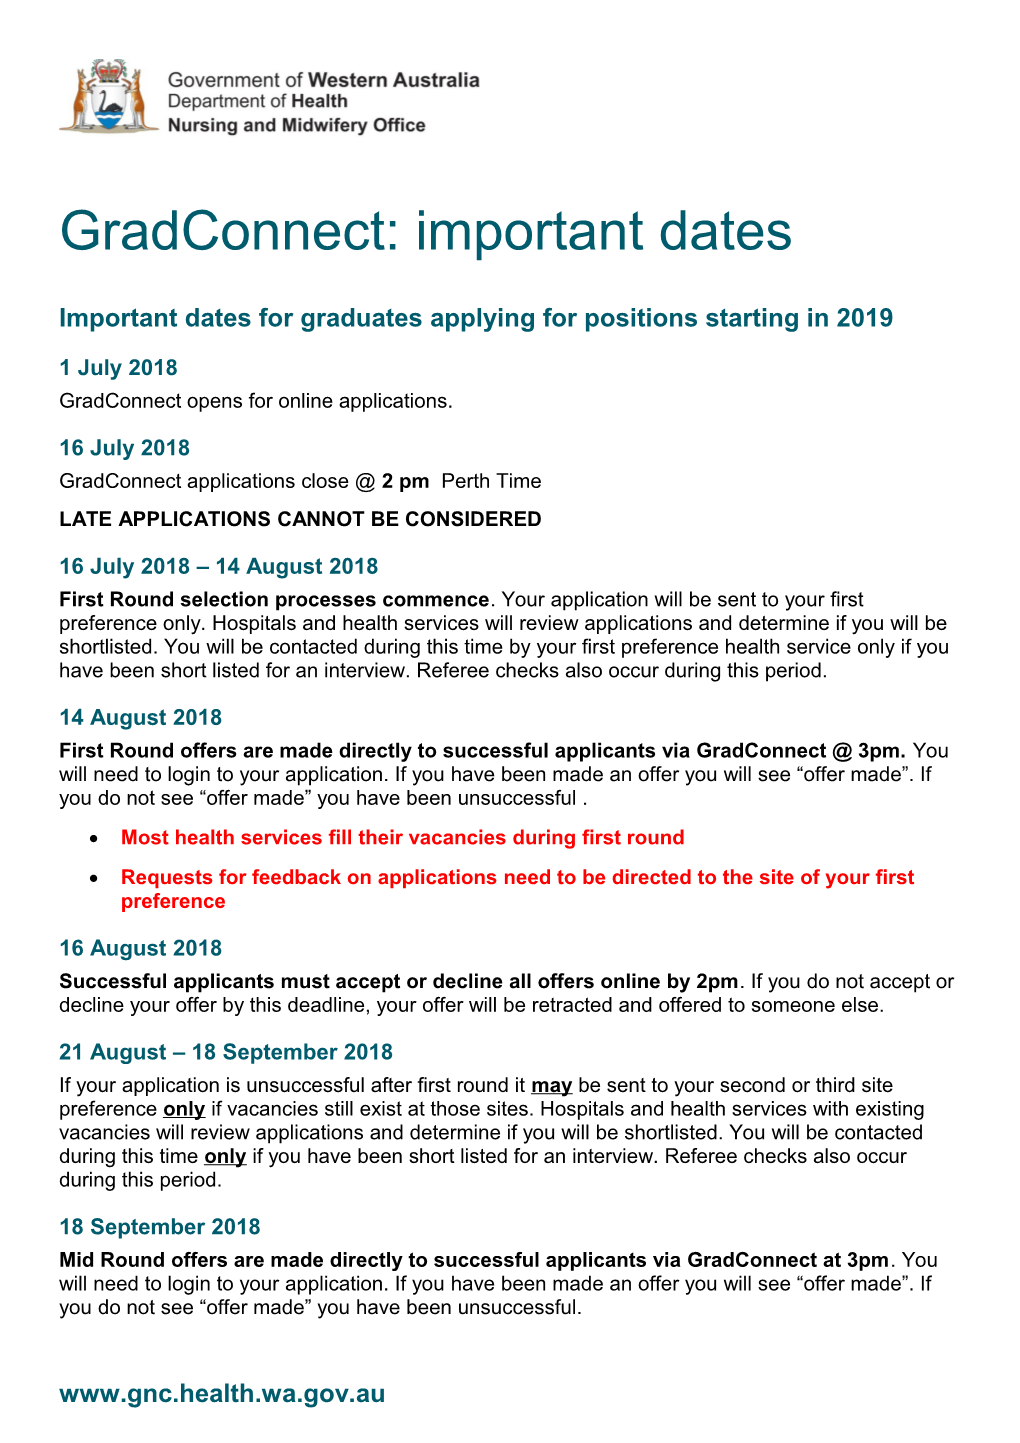 Important Dates for Graduates Applying for Positions Starting in 2019